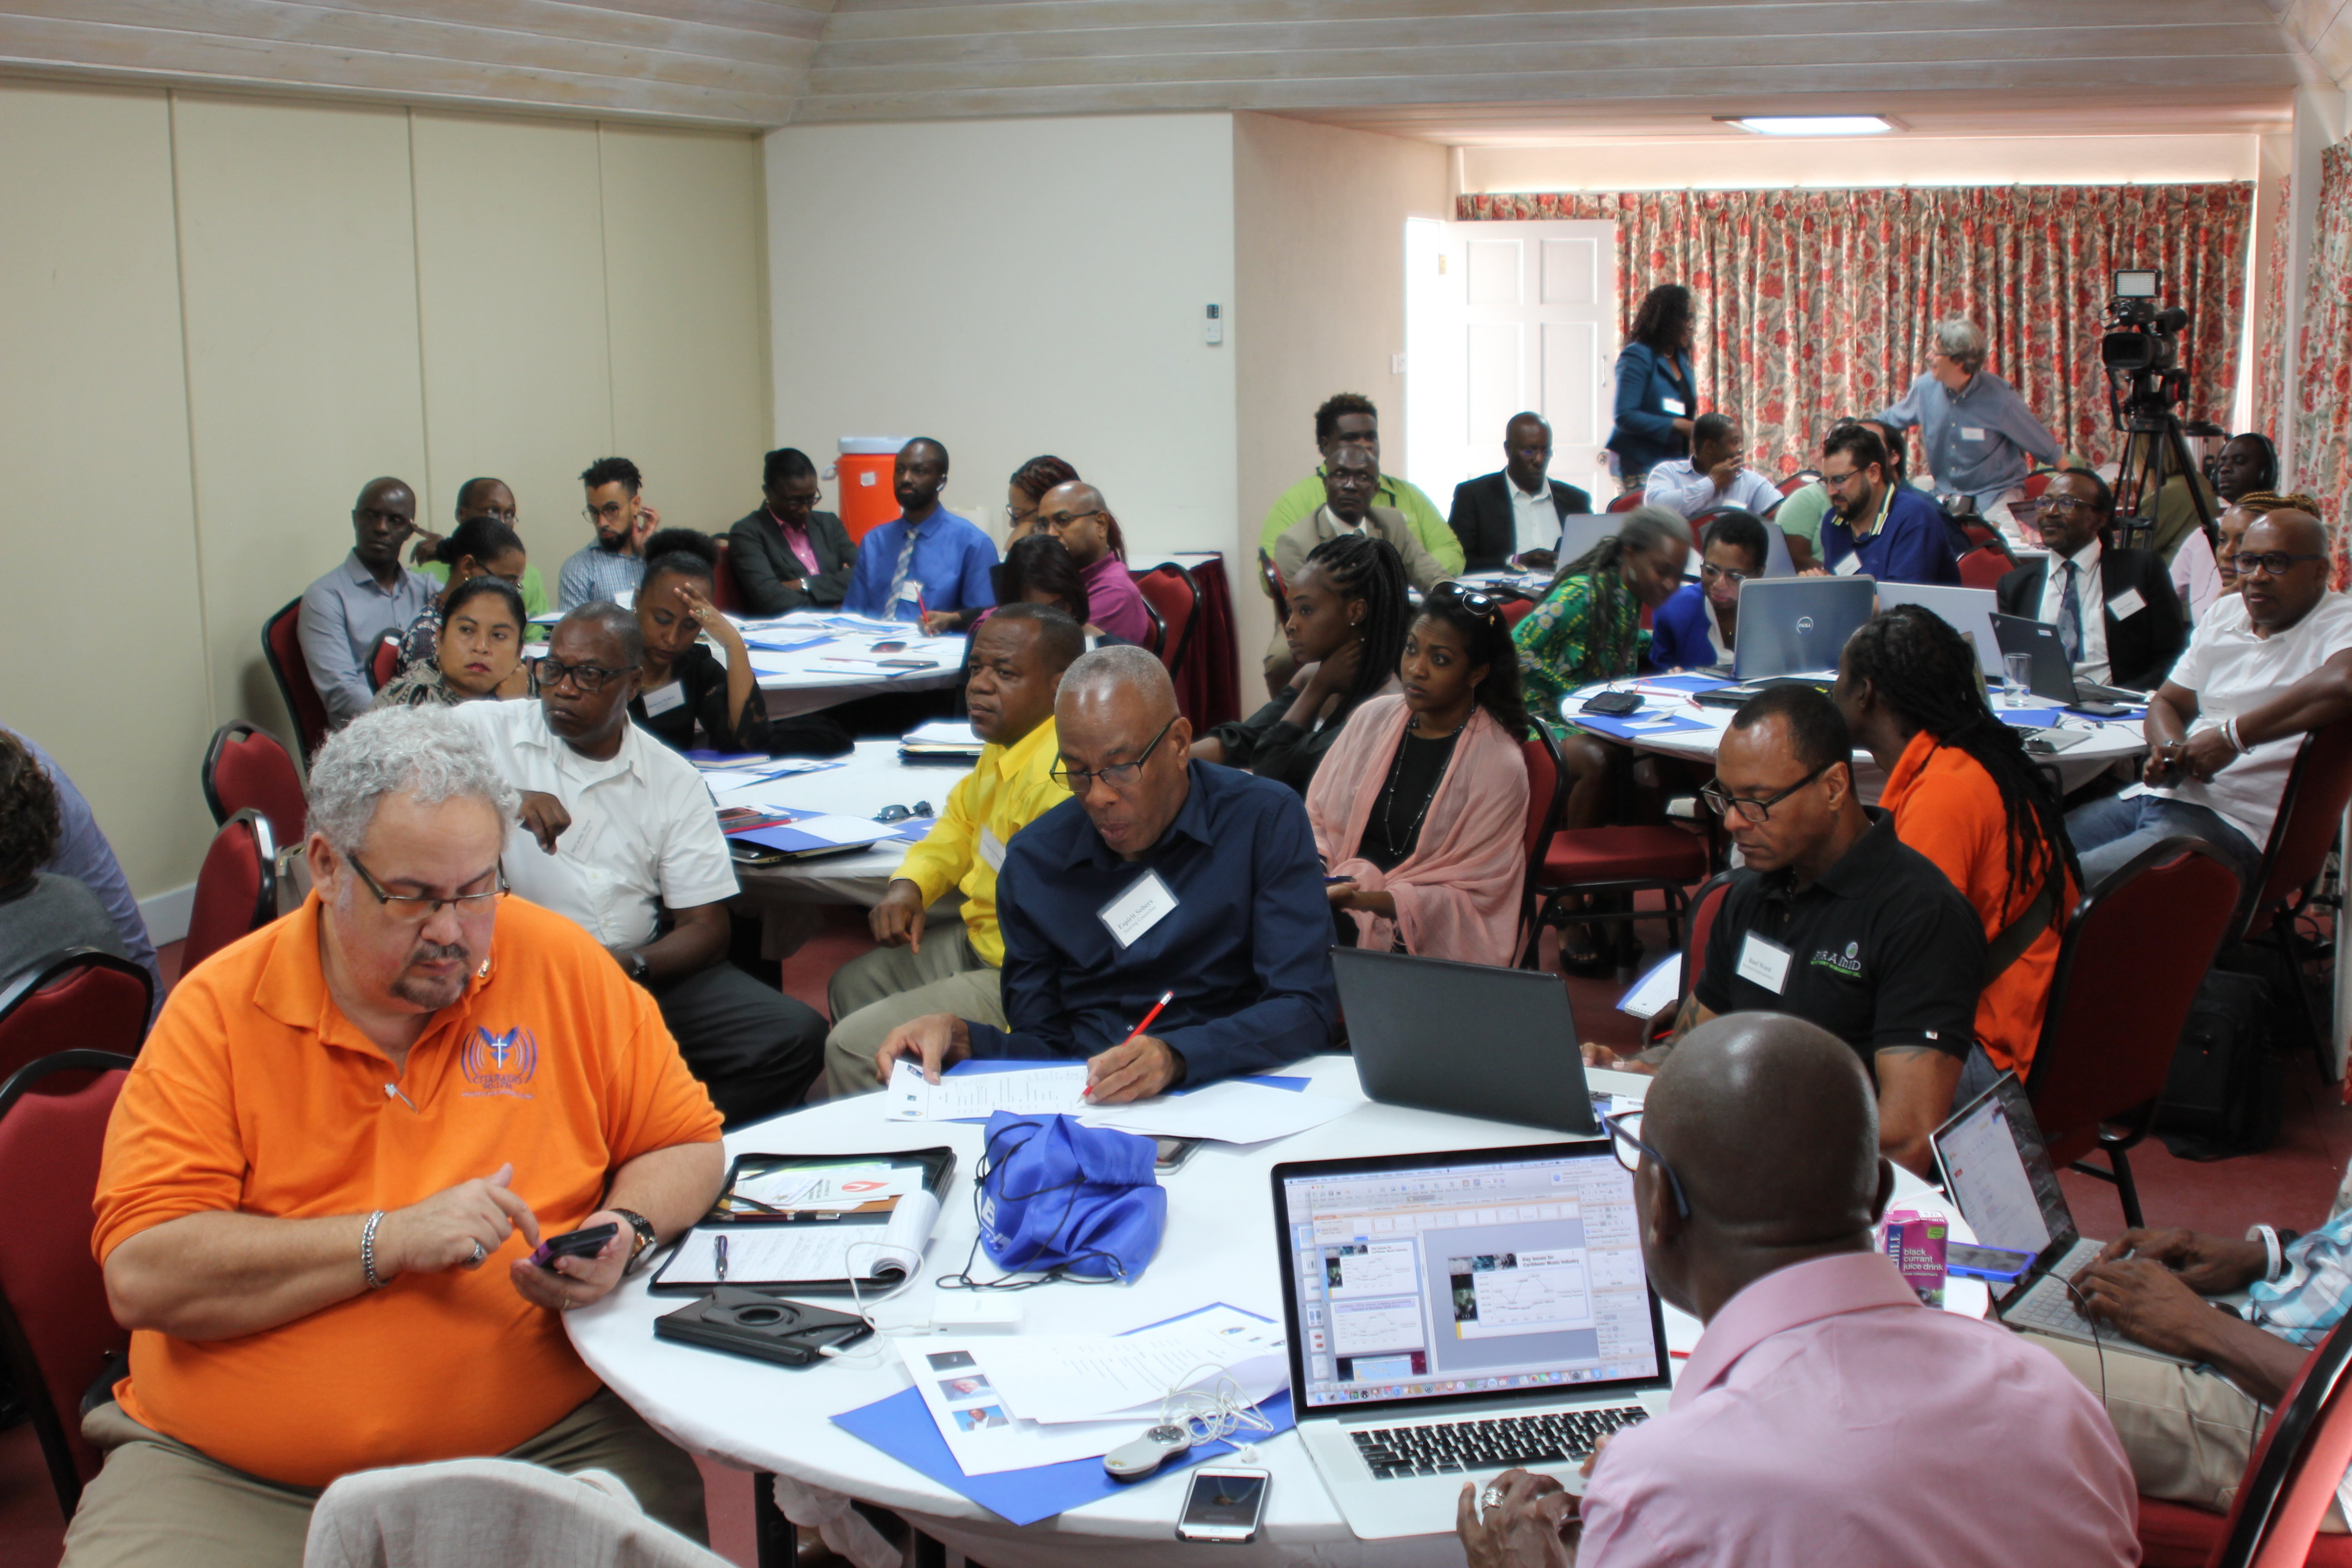 Regional music industry stakeholders at the CDB-funded Digitalisation of Caribbean Music Workshop hope to gain a competitive edge.